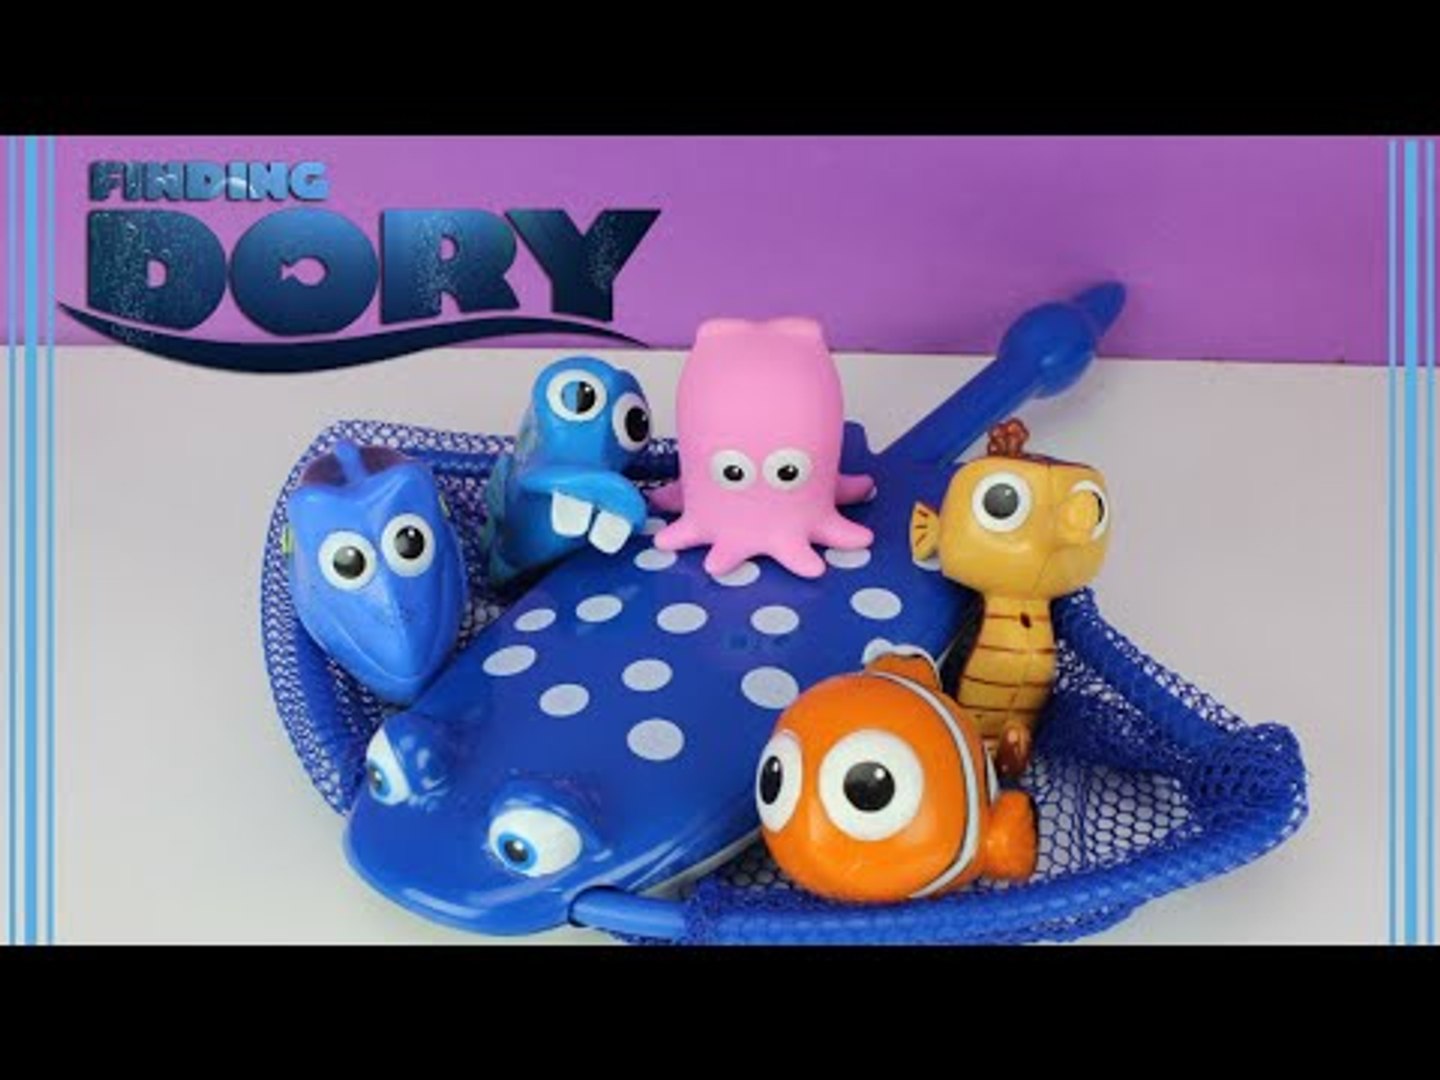 pearl finding nemo toy